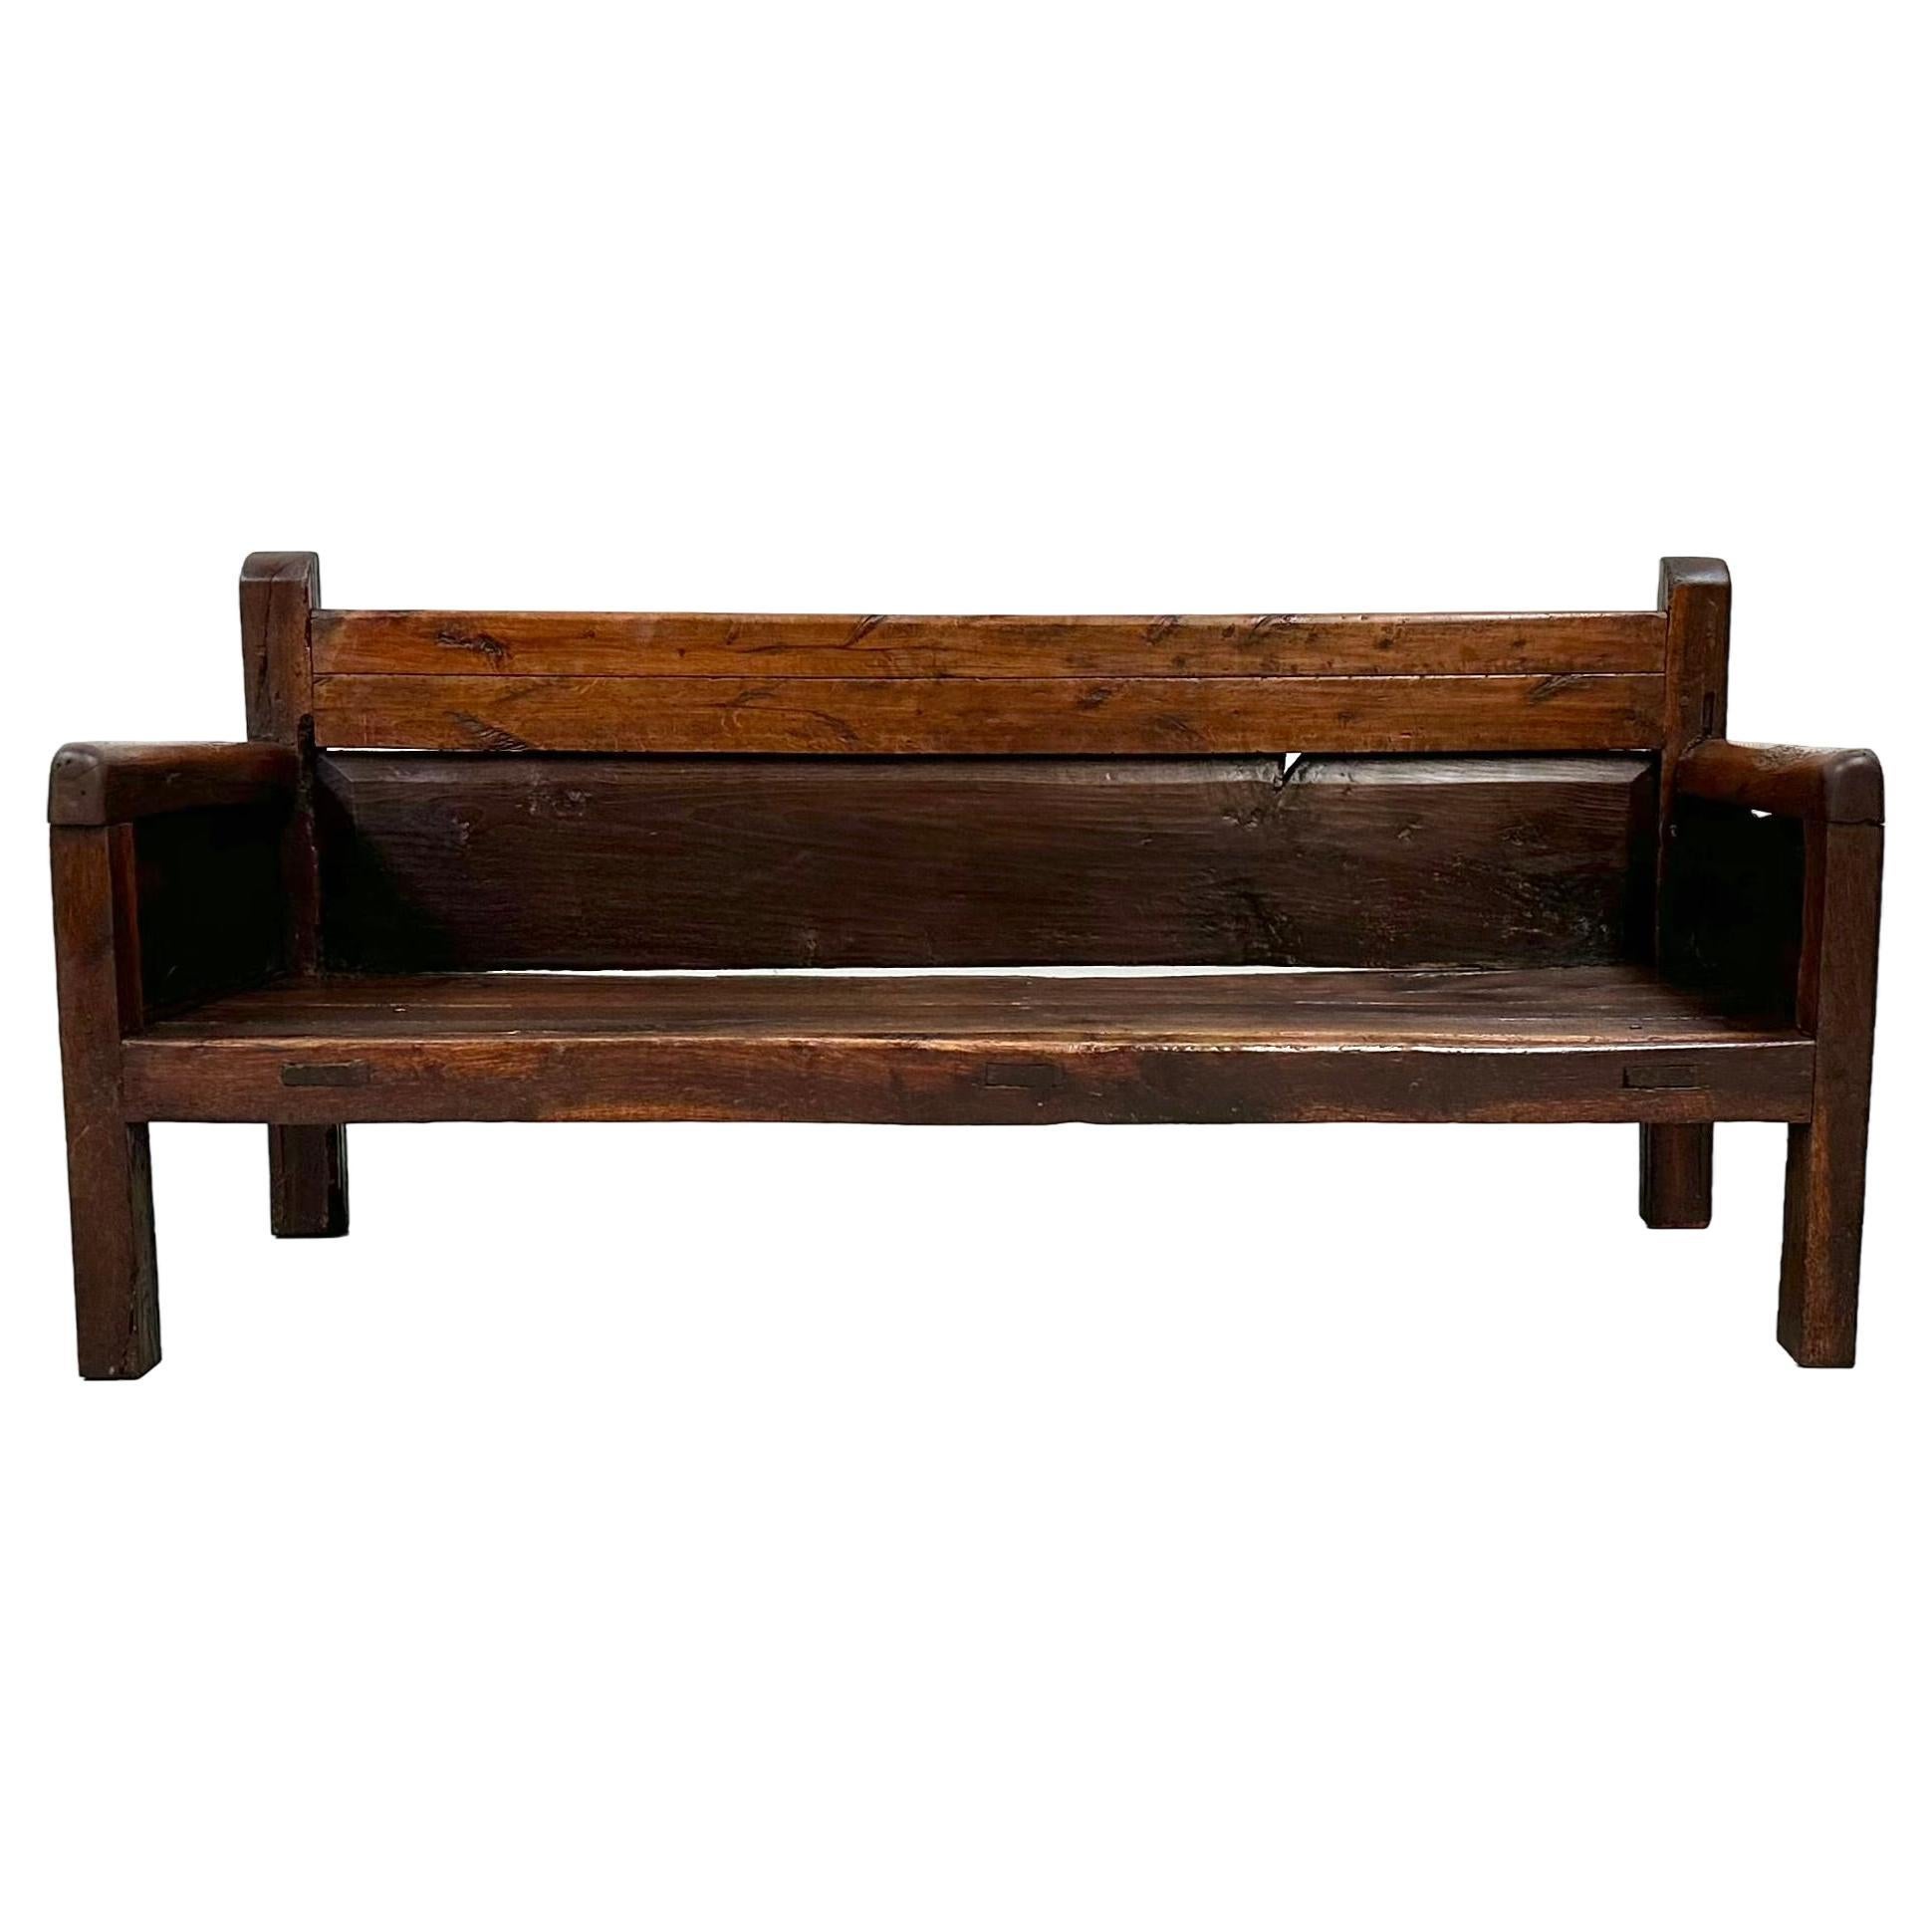 Antique Handmade Minimalistic Spanish Chestnut Wood Bench, Early 19th Century For Sale